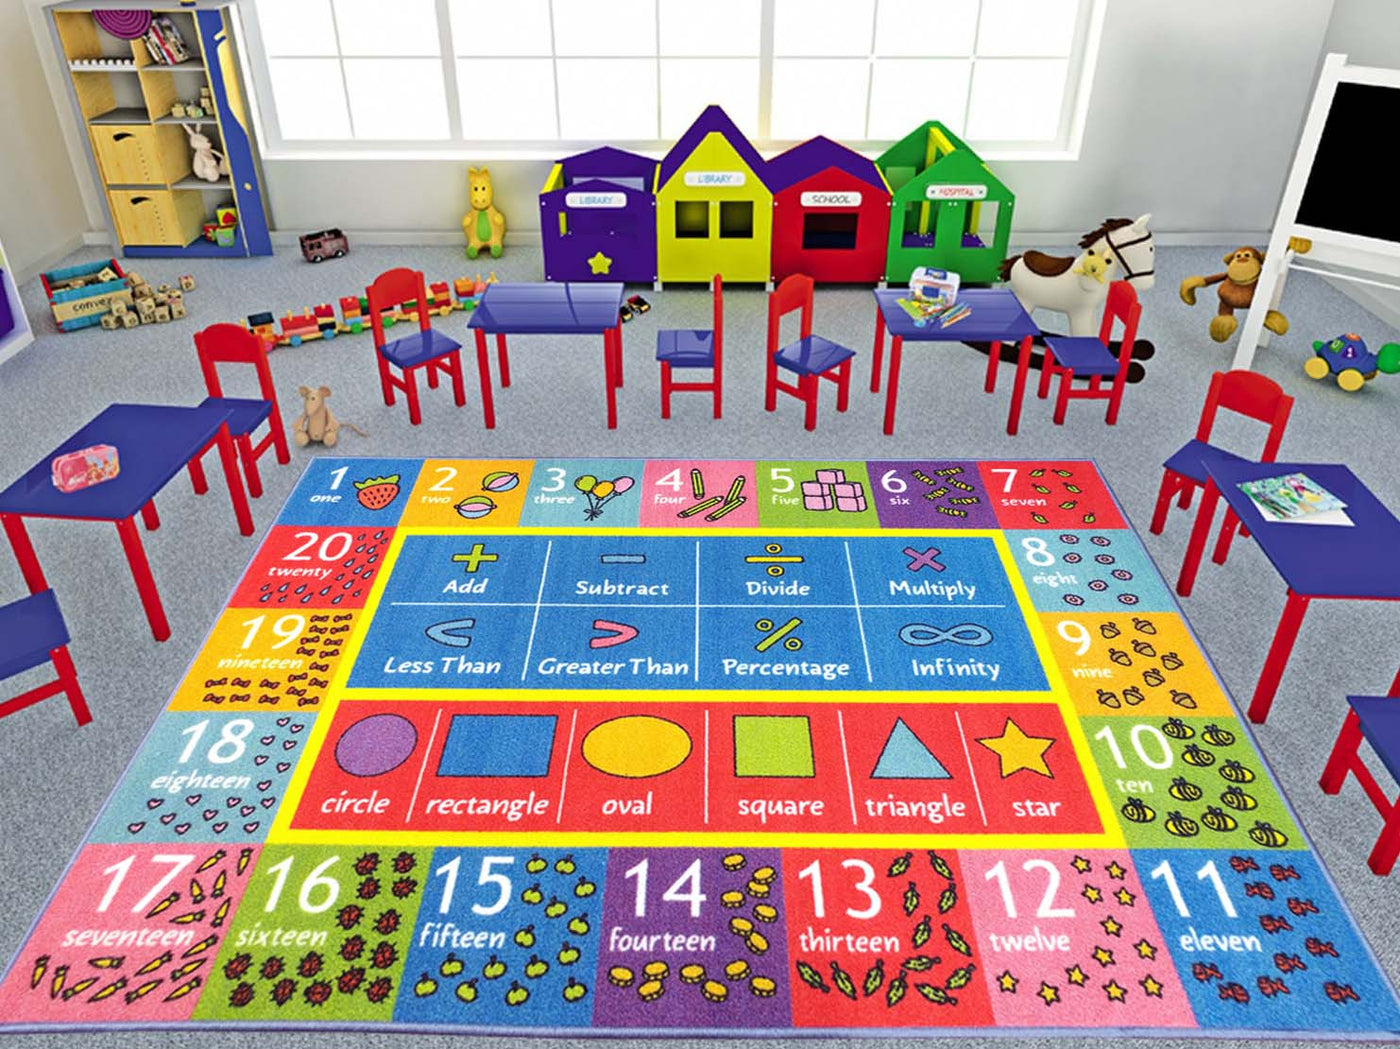 KC Cubs Playtime Collection Math Symbols, Numbers and Shapes Educational Learning Area Rug Carpet for Kids and Children Bedroom and Playroom